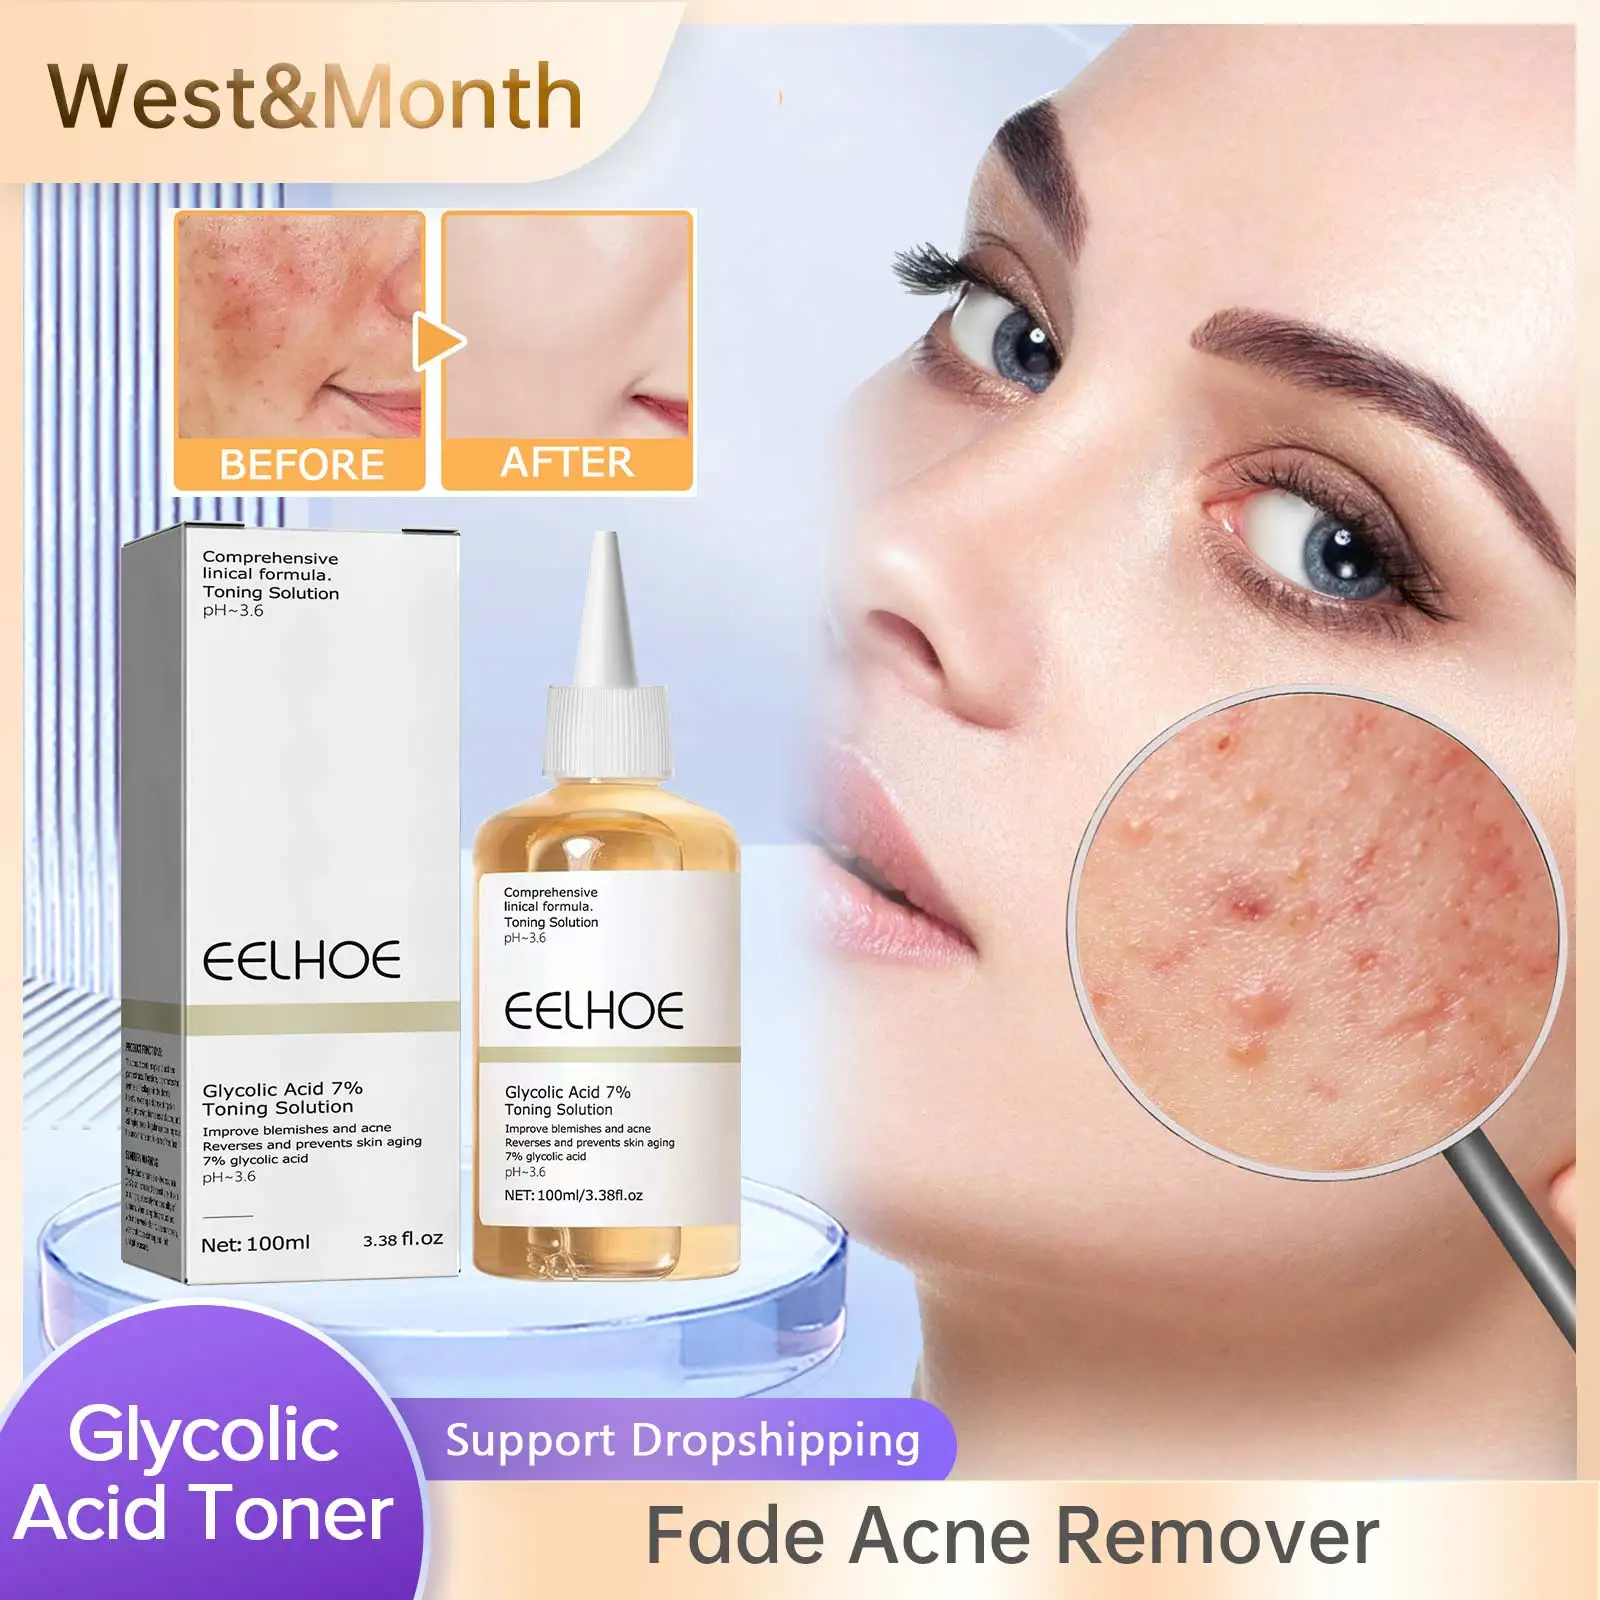 

Glycolic Acid 7% Toning Solution Anti Aging Face Toner Acne Remover Lifting Firming Wrinkles Exfoliator Glowing Facial Skin Care